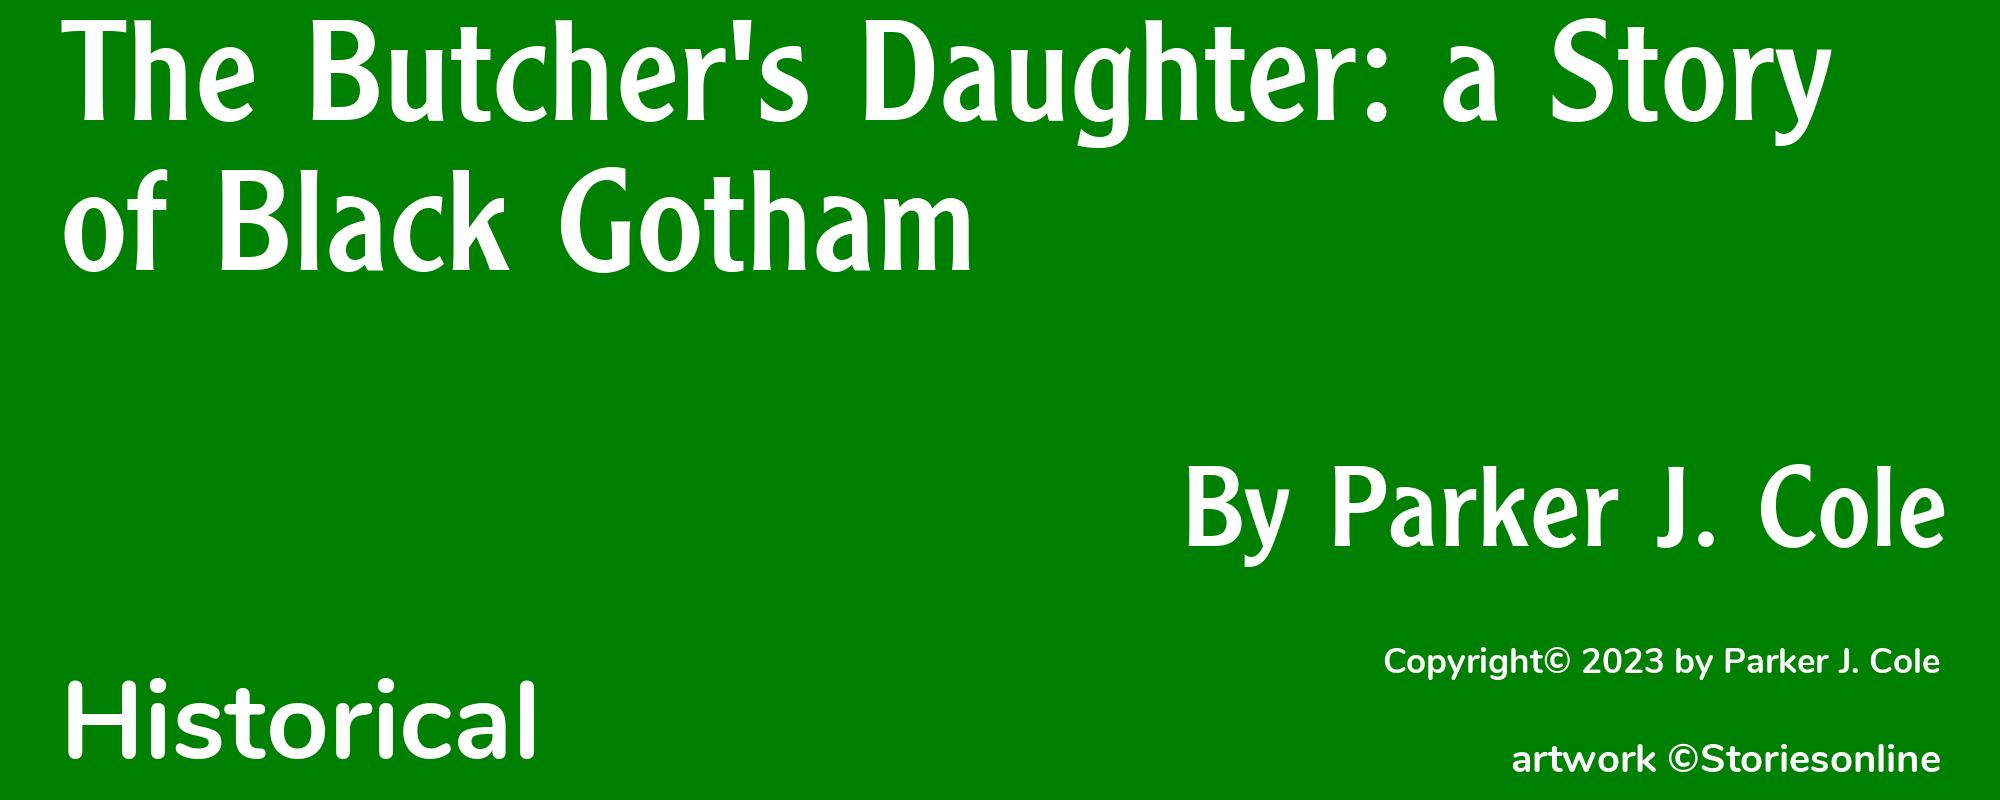 The Butcher's Daughter: a Story of Black Gotham - Cover